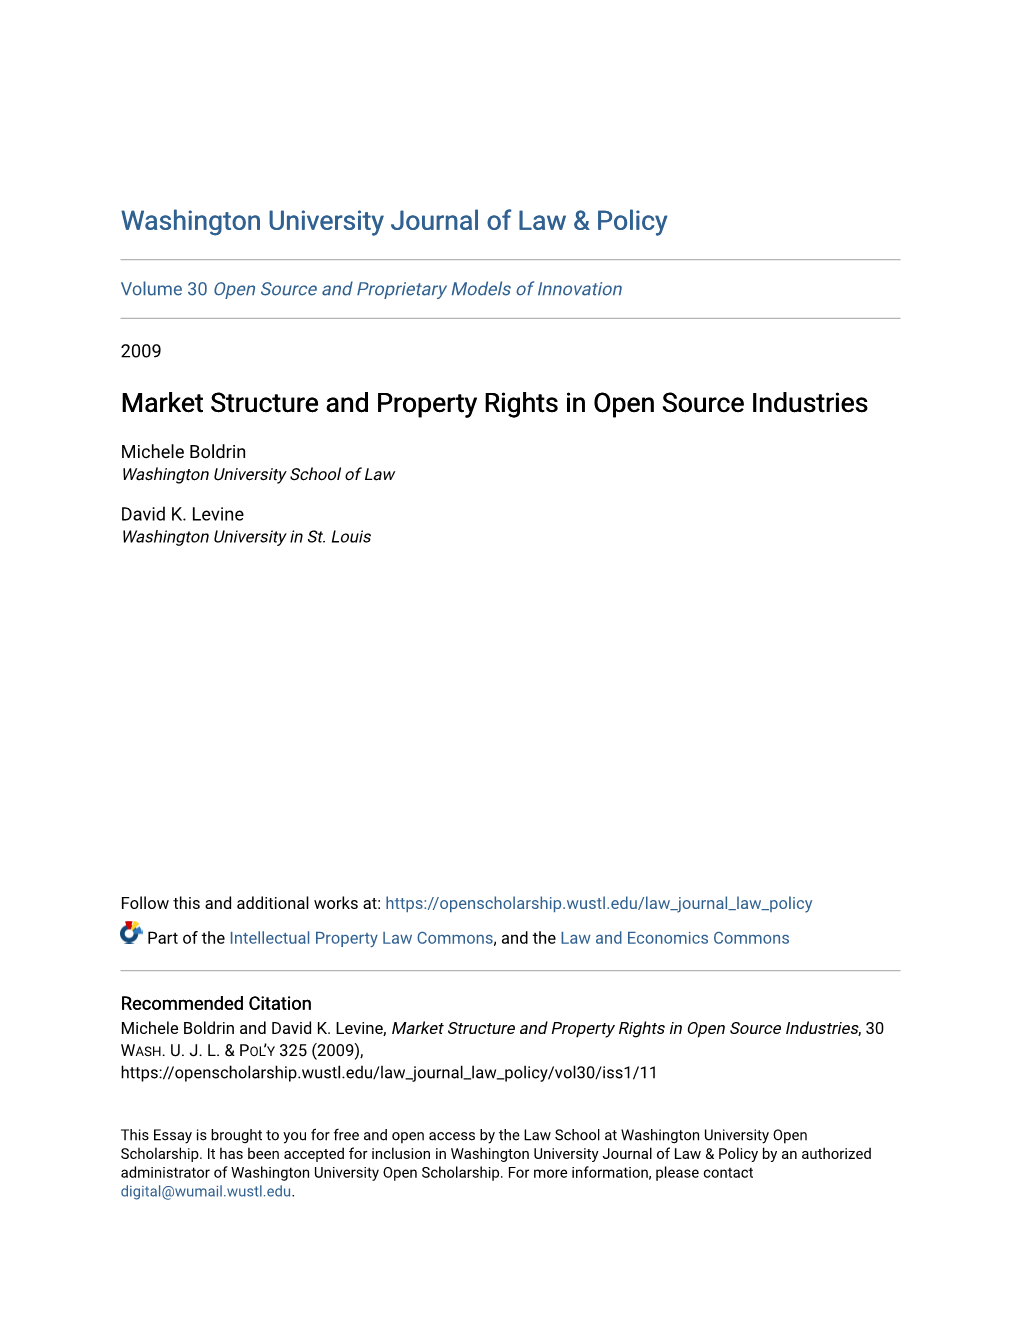 Market Structure and Property Rights in Open Source Industries